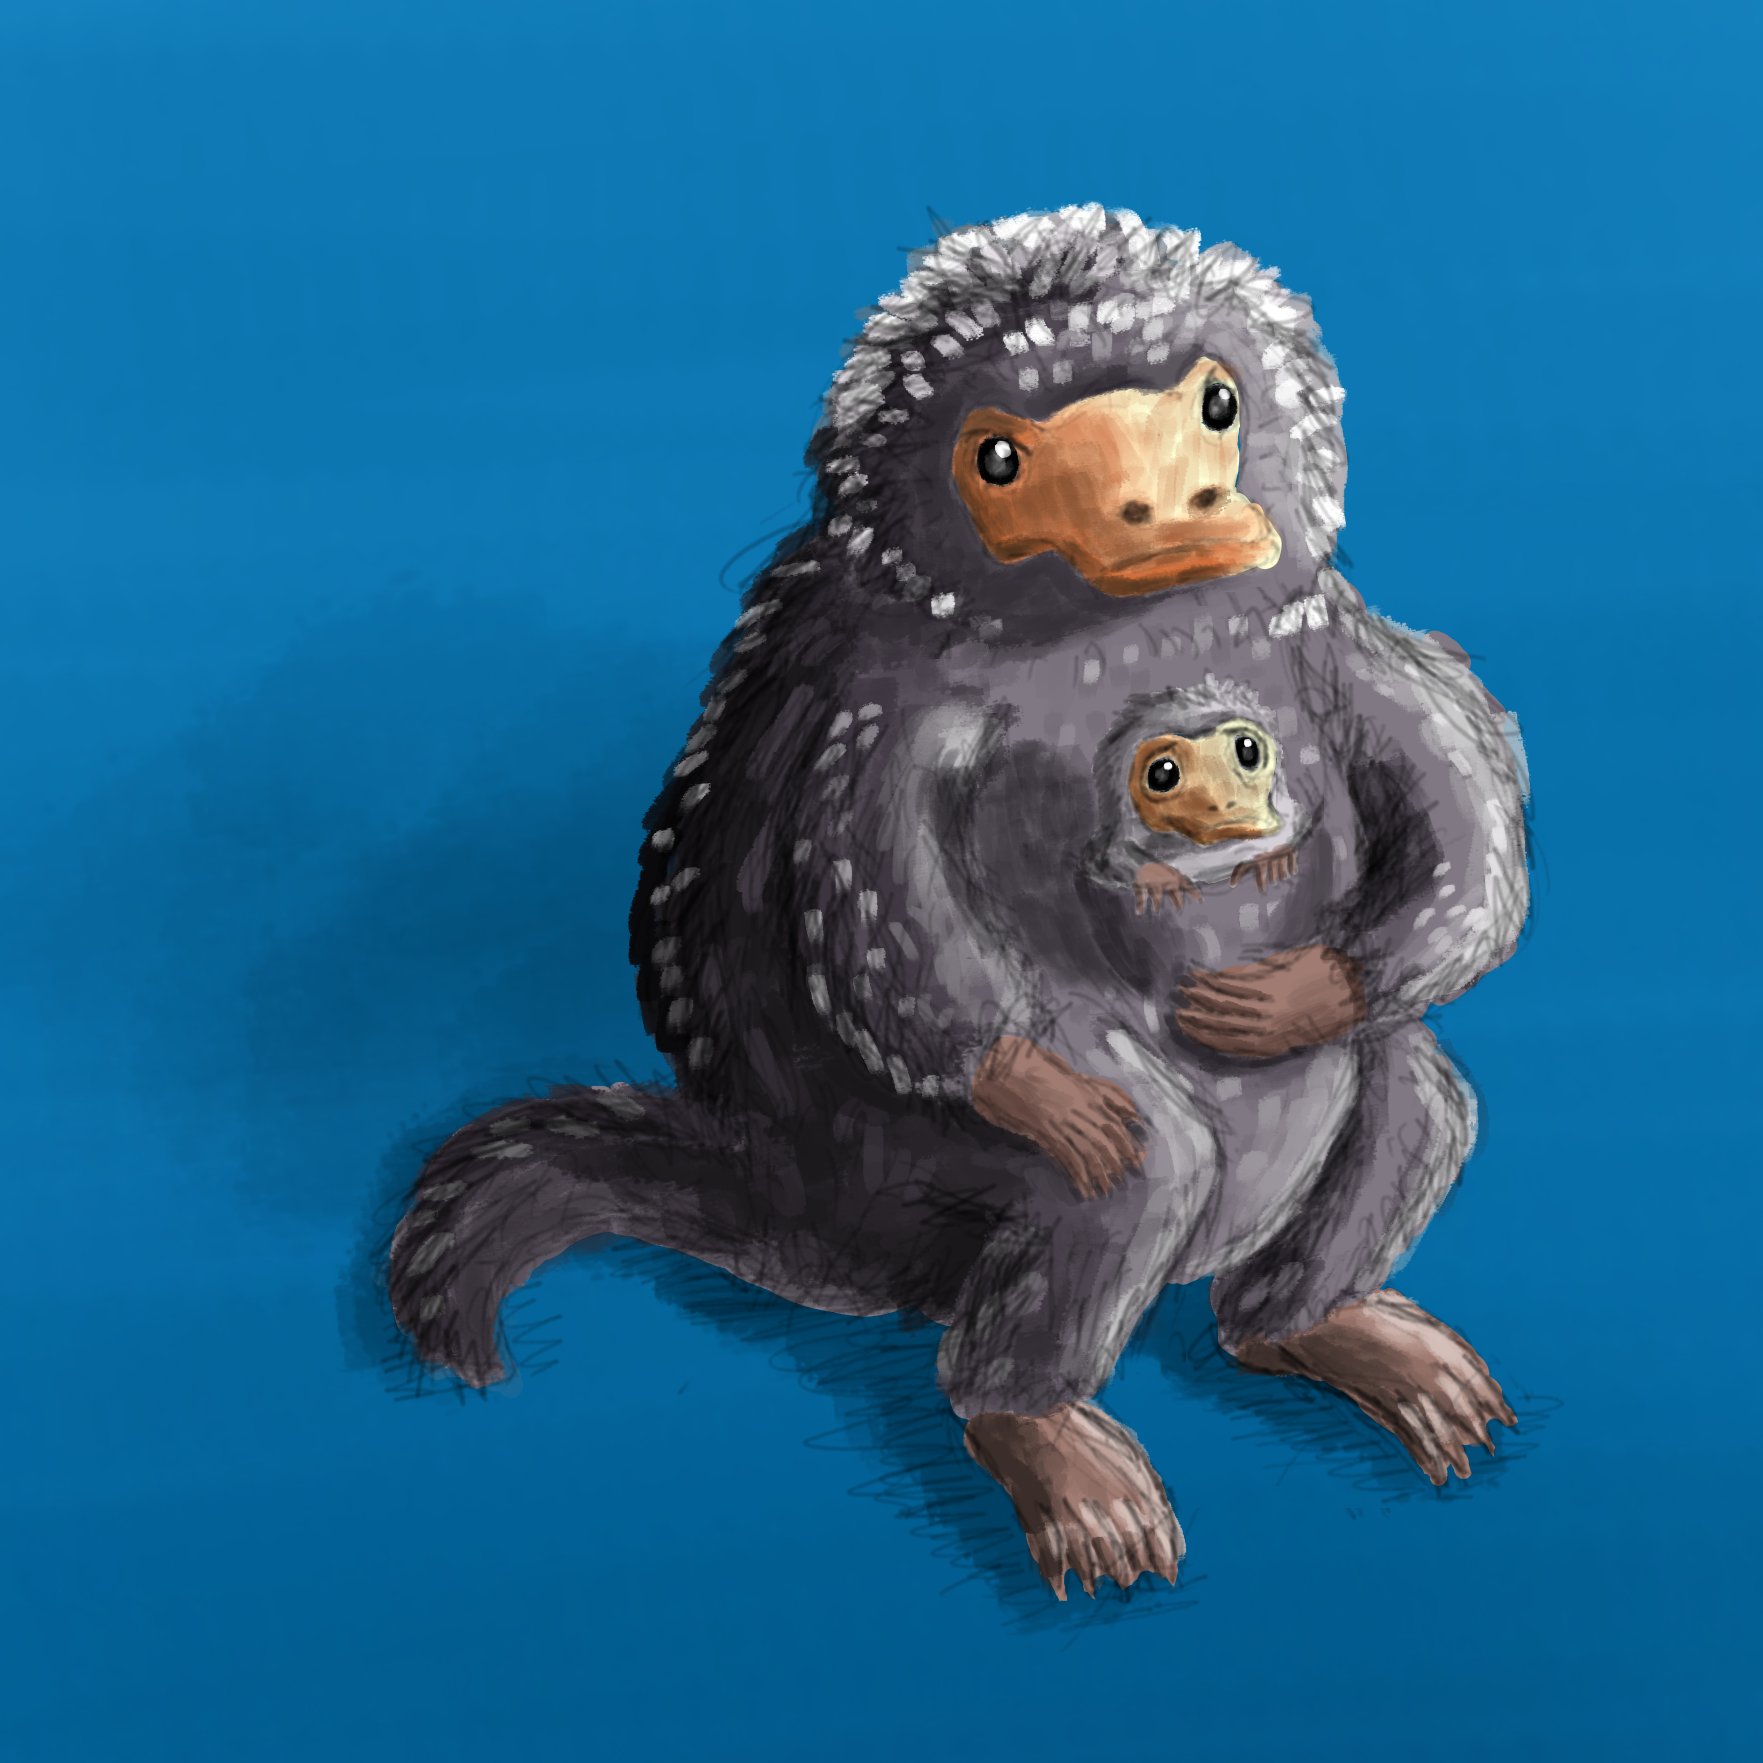 A niffler with a baby niffler in its pocket